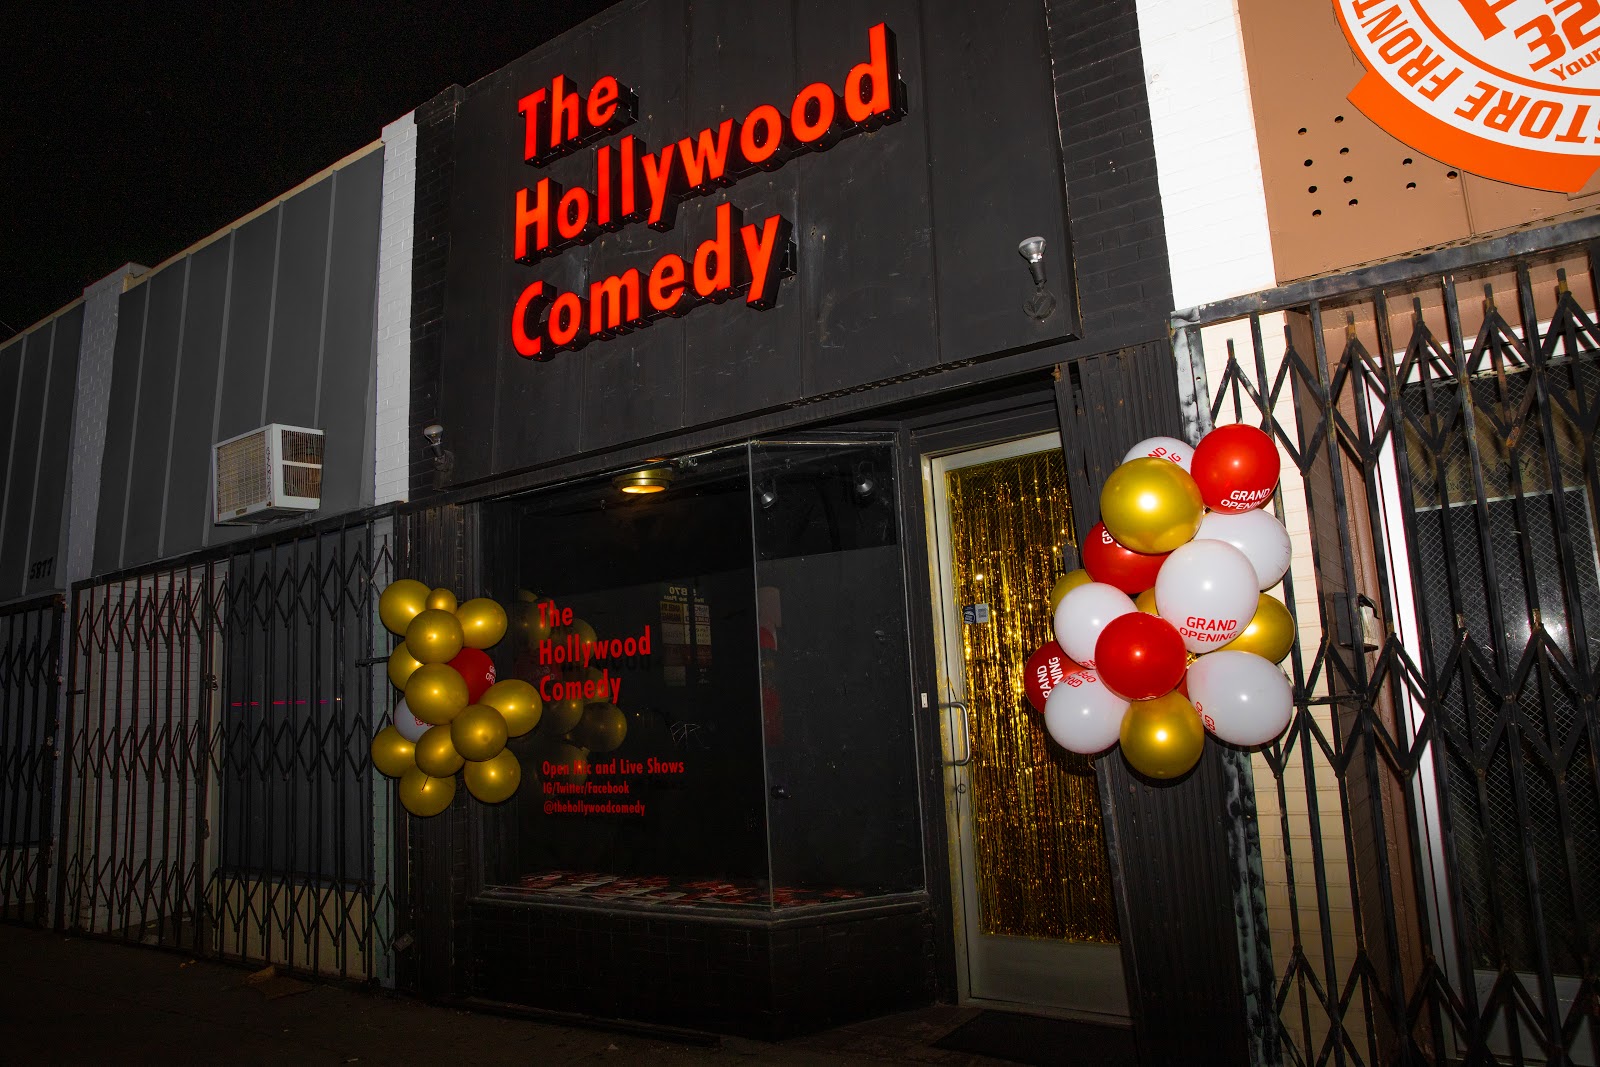 Member The Hollywood Comedy in Los Angeles CA